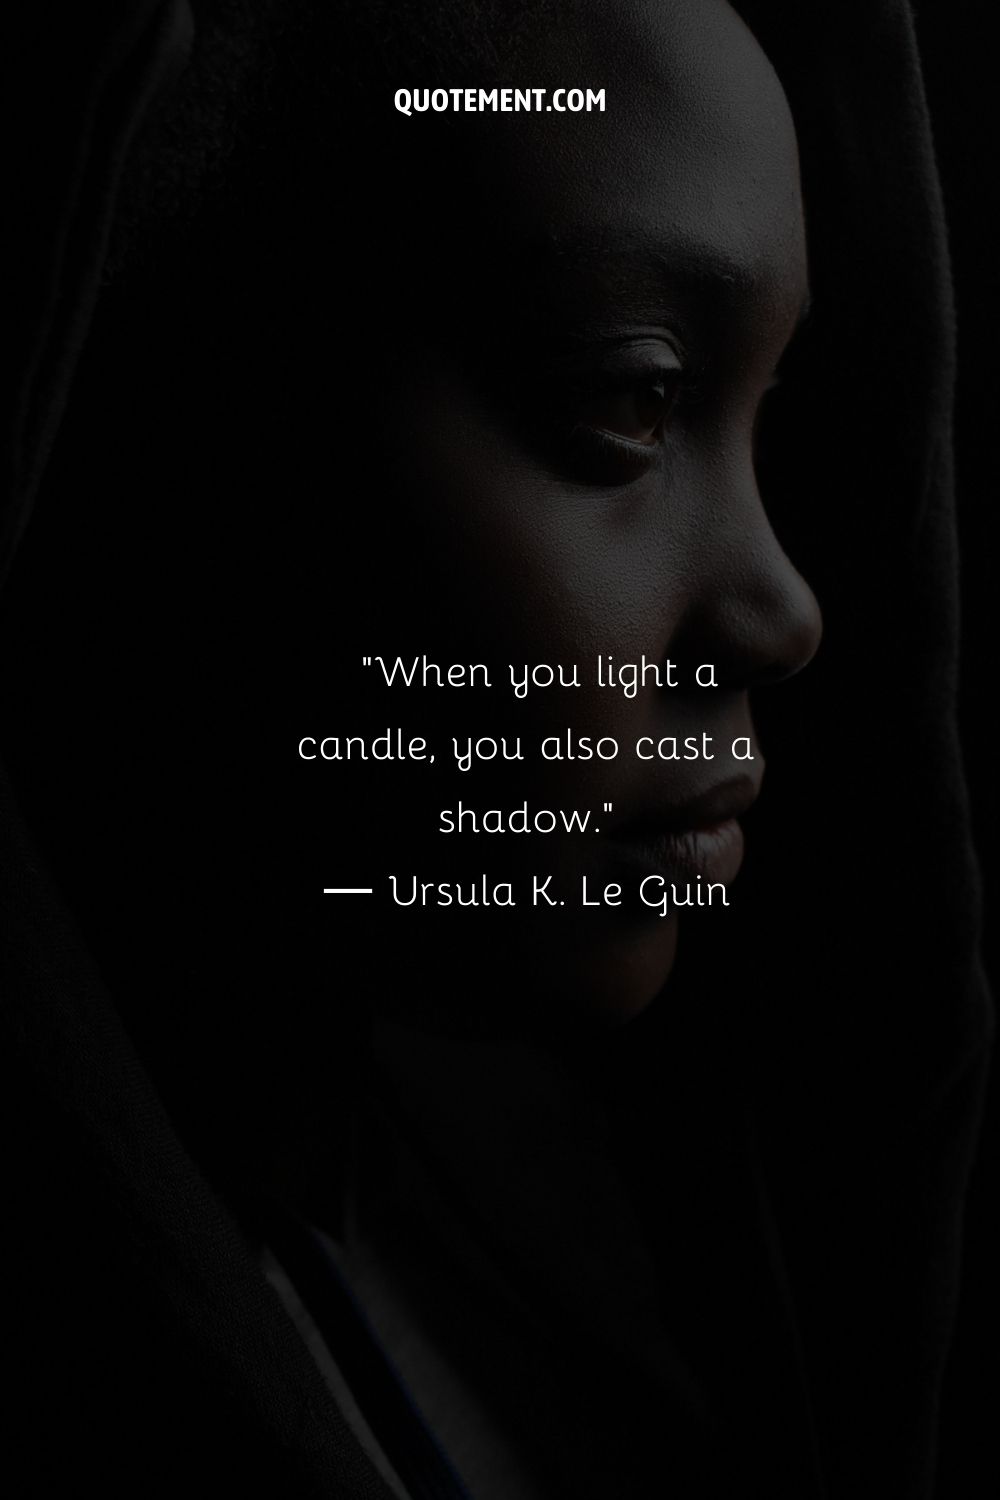 When you light a candle, you also cast a shadow